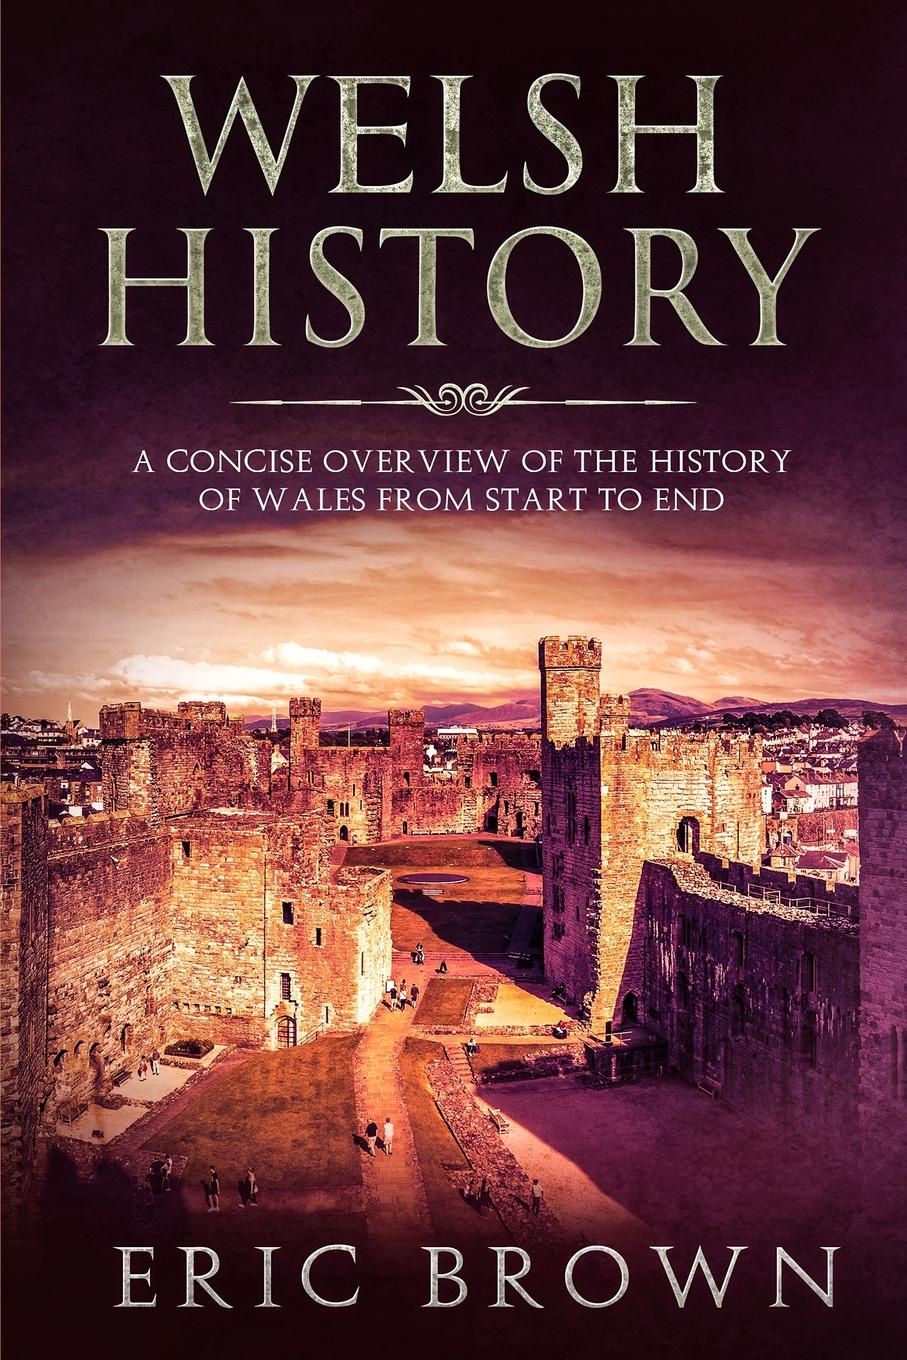 Welsh History. A Concise Overview of the History of Wales from Start to End